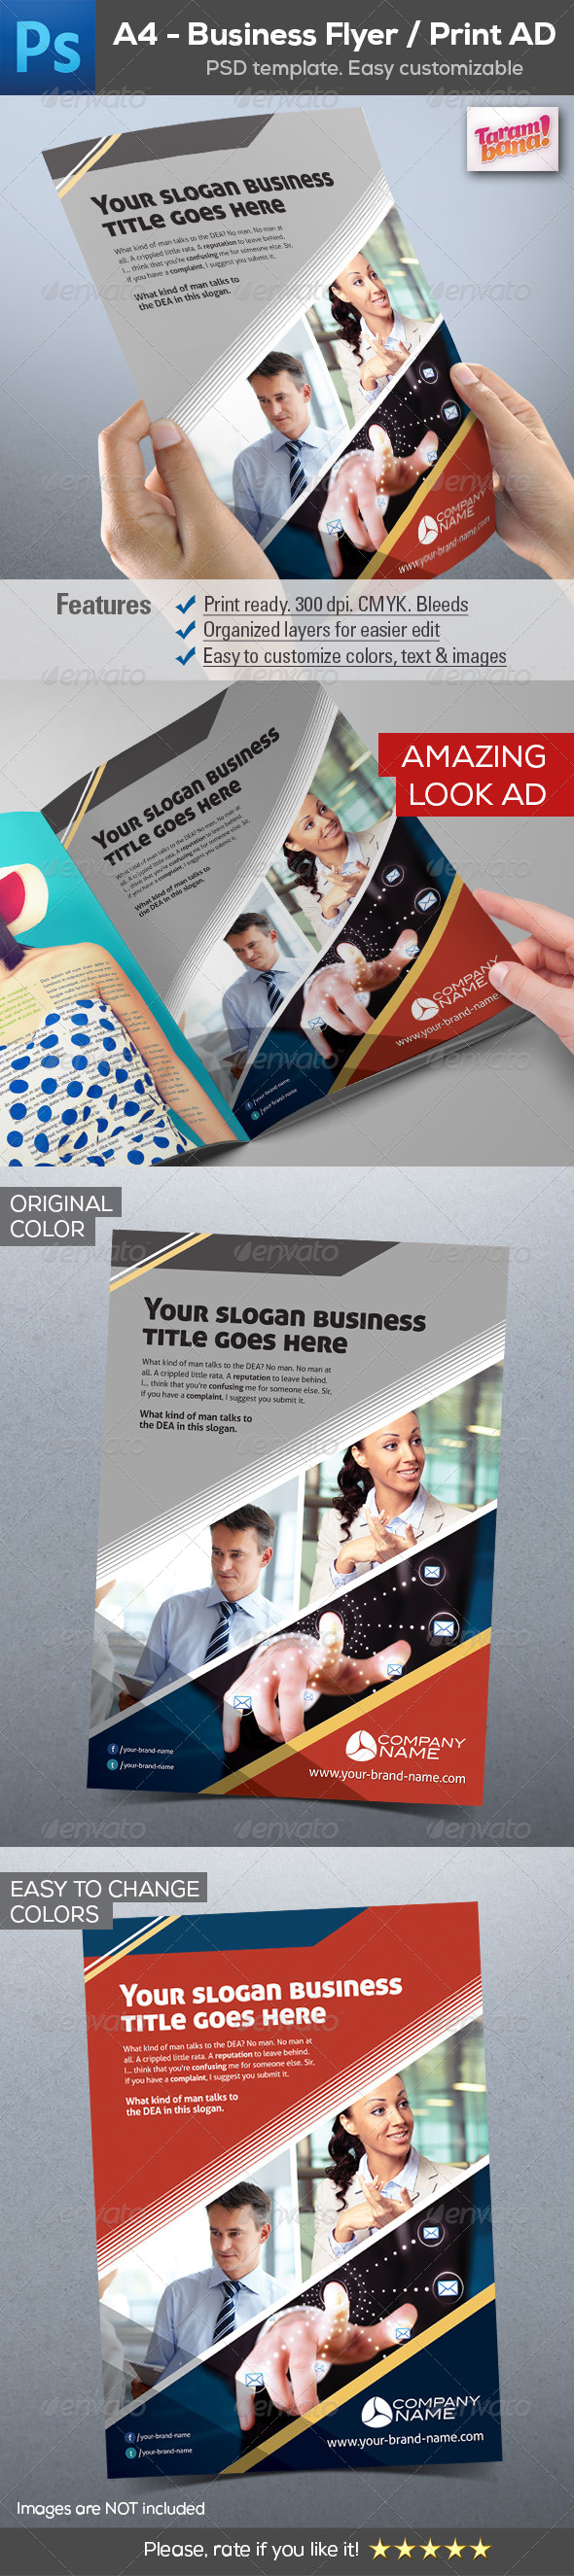 Business Flyer Print AD Template